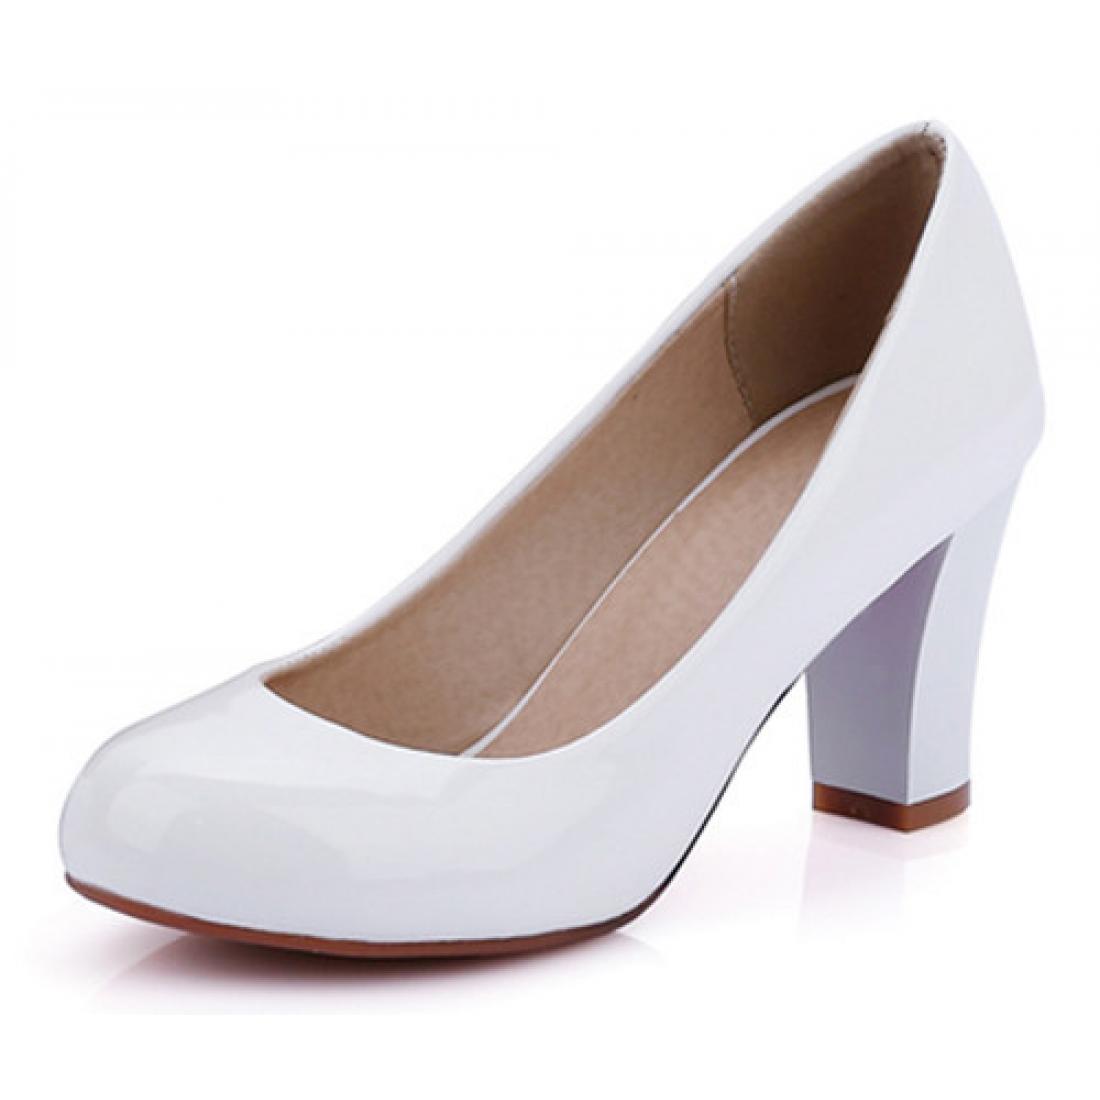 White Patent Glossy Round Head High Heels Shoes High Heels